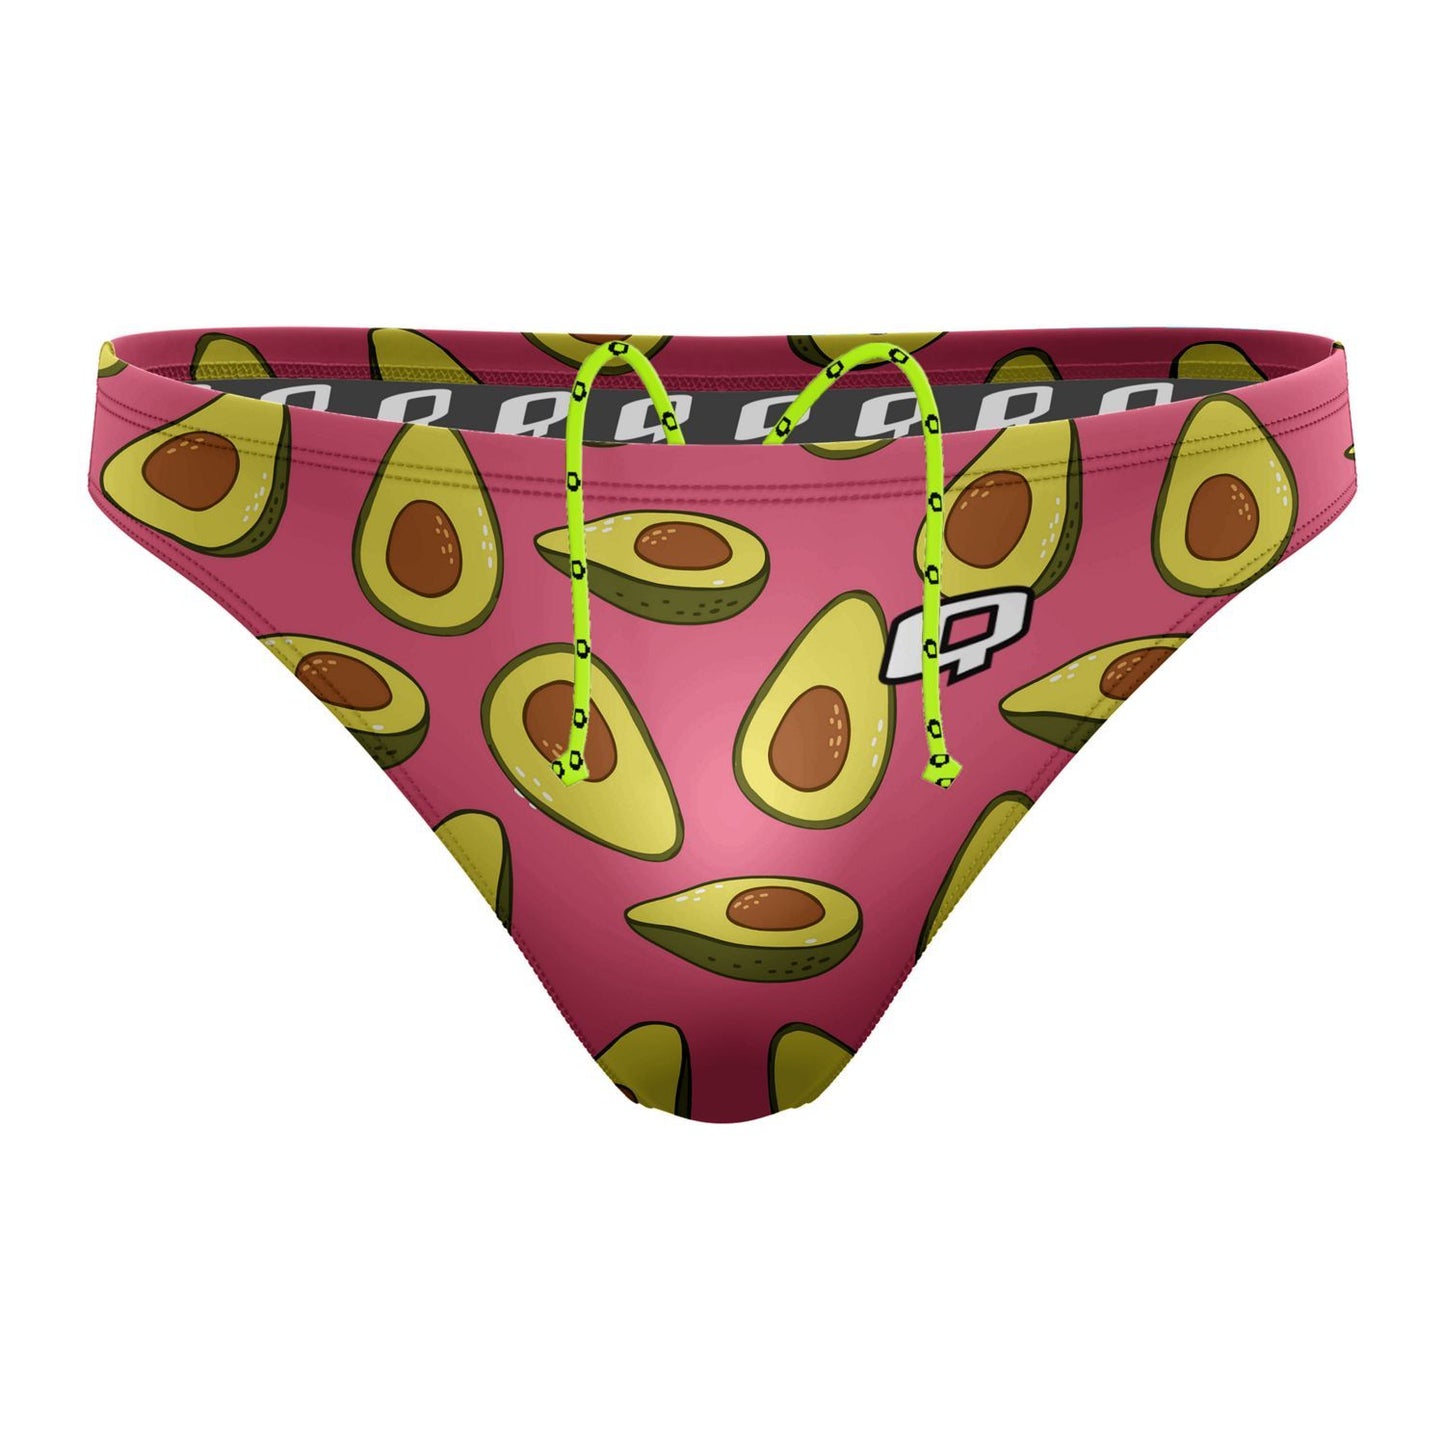 Toasted Waterpolo Brief